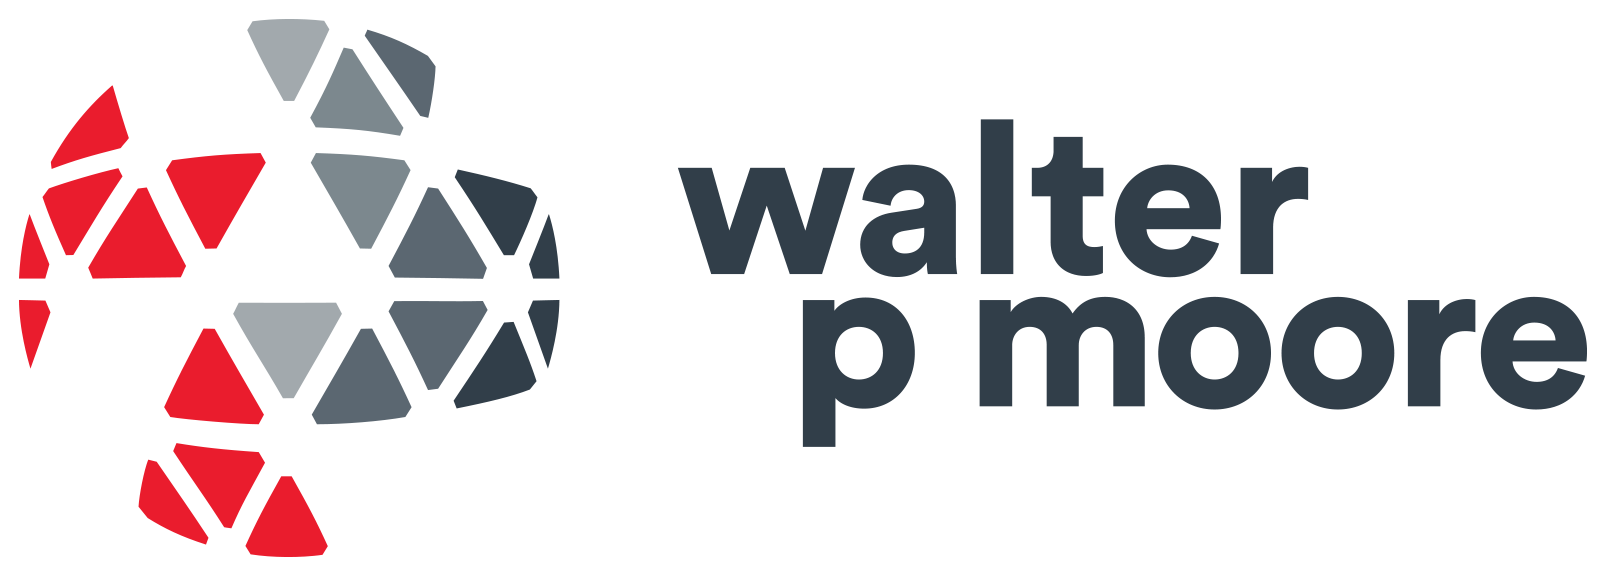 wpm_logo_4color-w-space.png